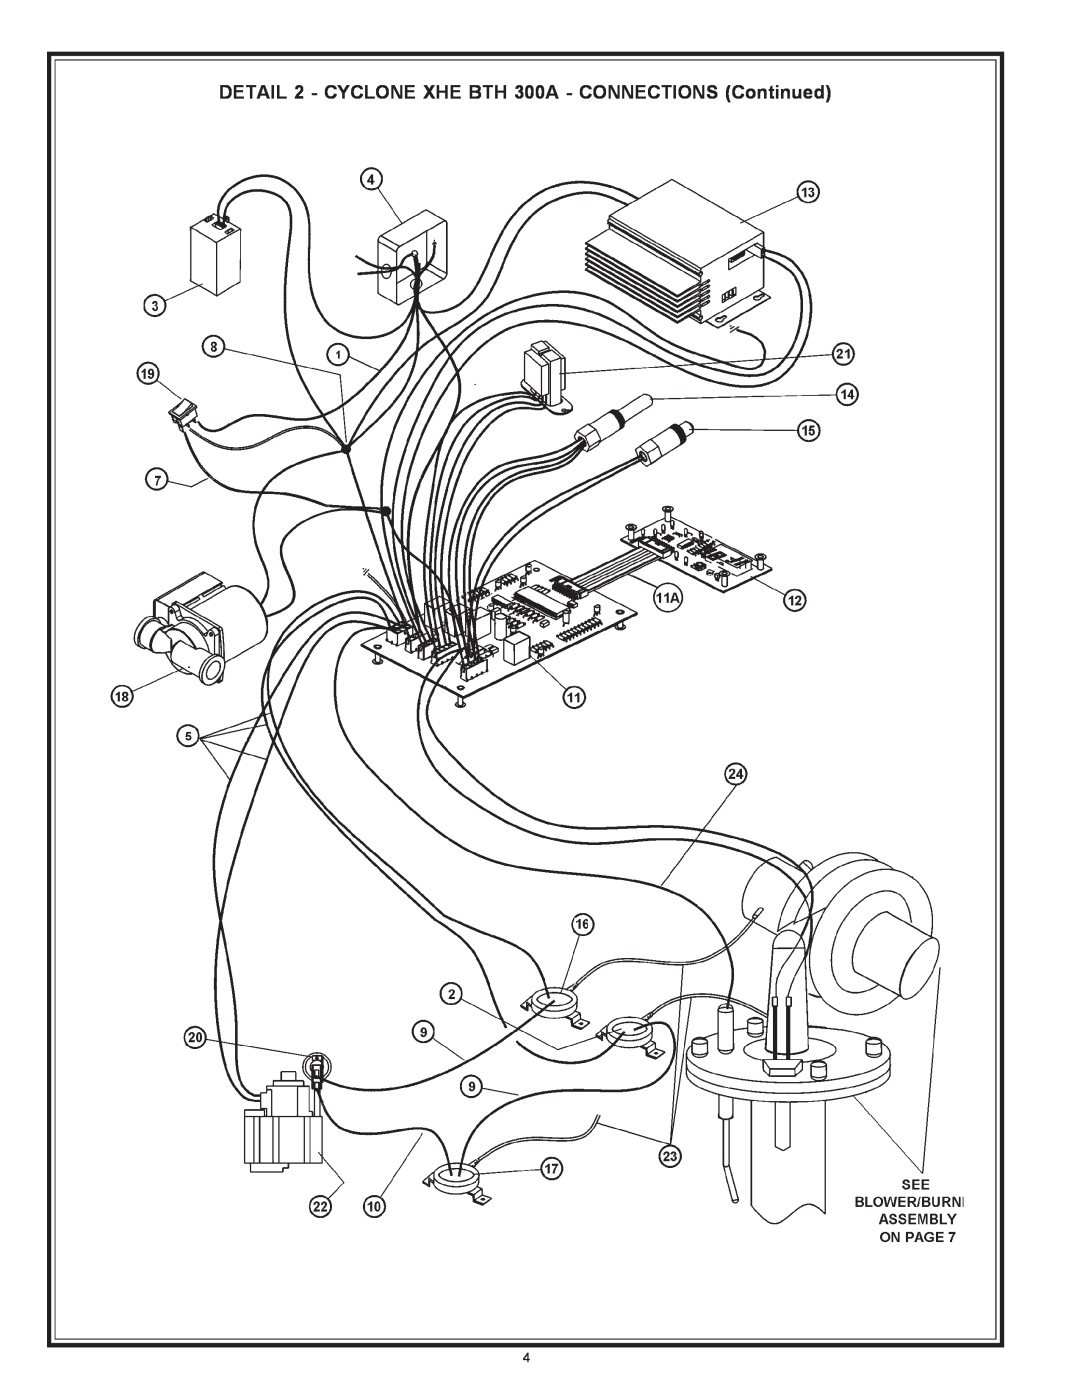 A.O. Smith 970 Series manual DETAIL 2 - CYCLONE XHE BTH 300A - CONNECTIONS Continued 